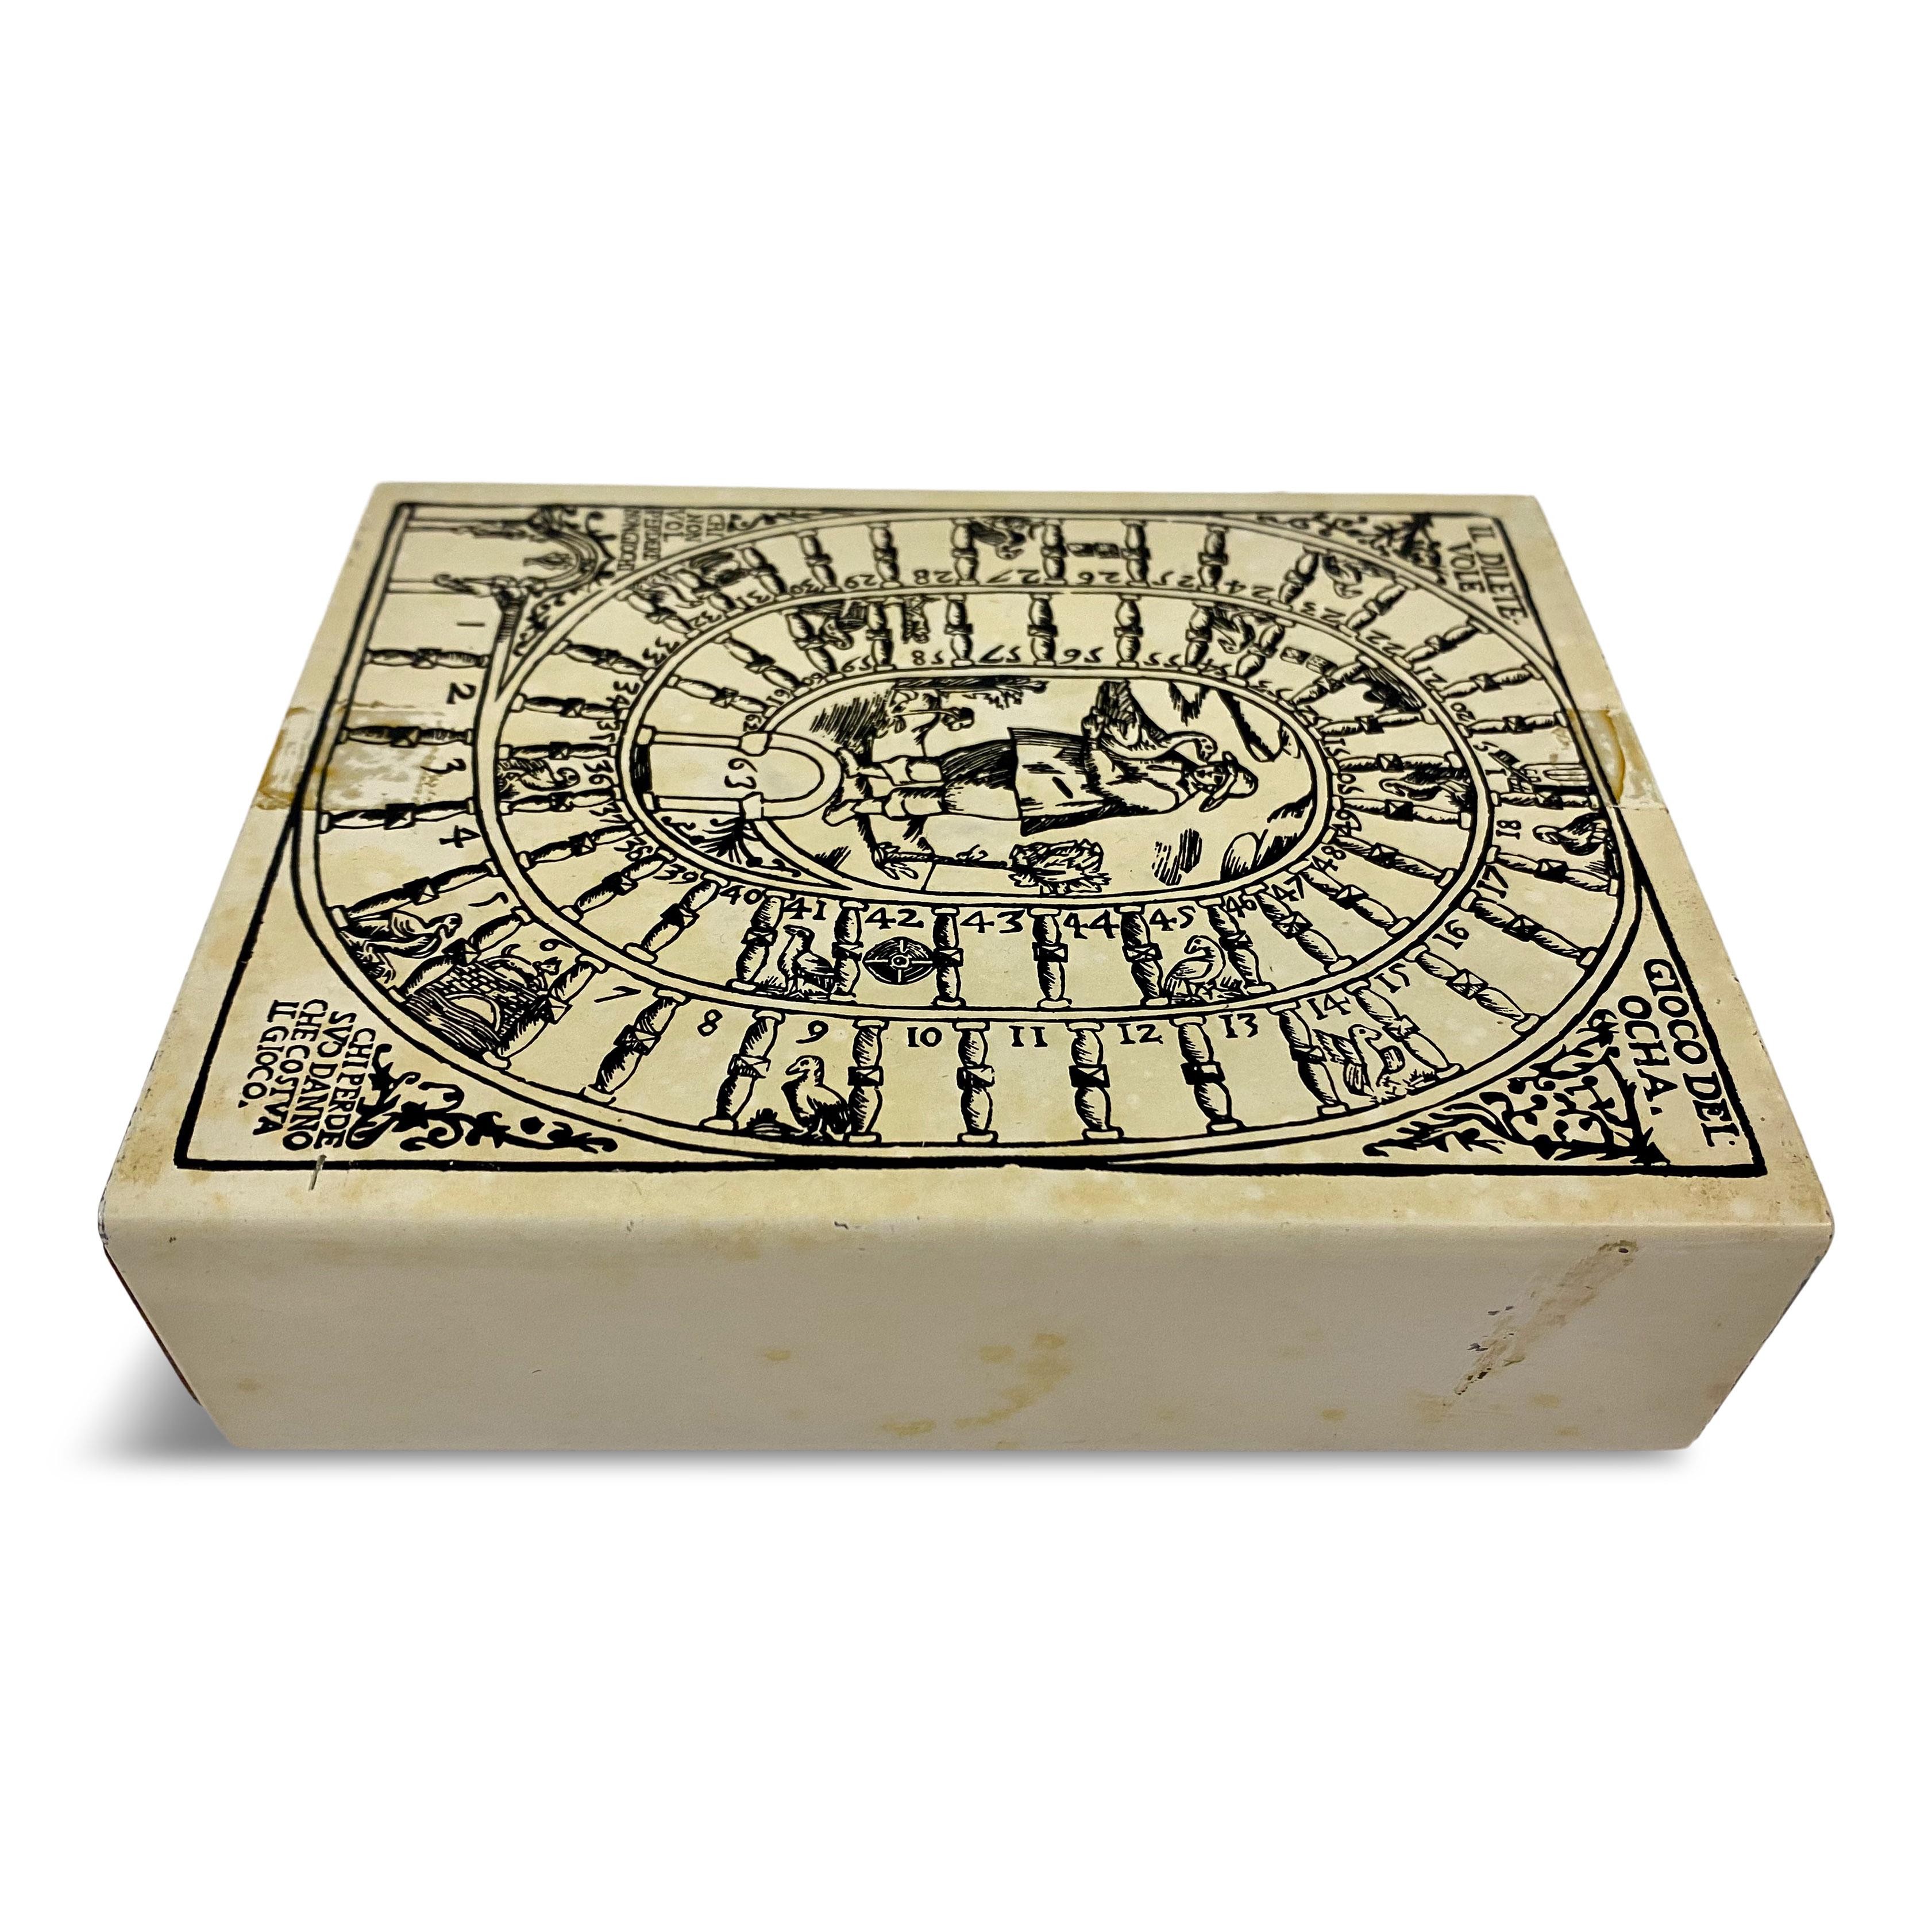 Storage or cigar box

Printed aluminium sleeve

Wooden inner

Possibly by Fornasetti

Italy, 1950s